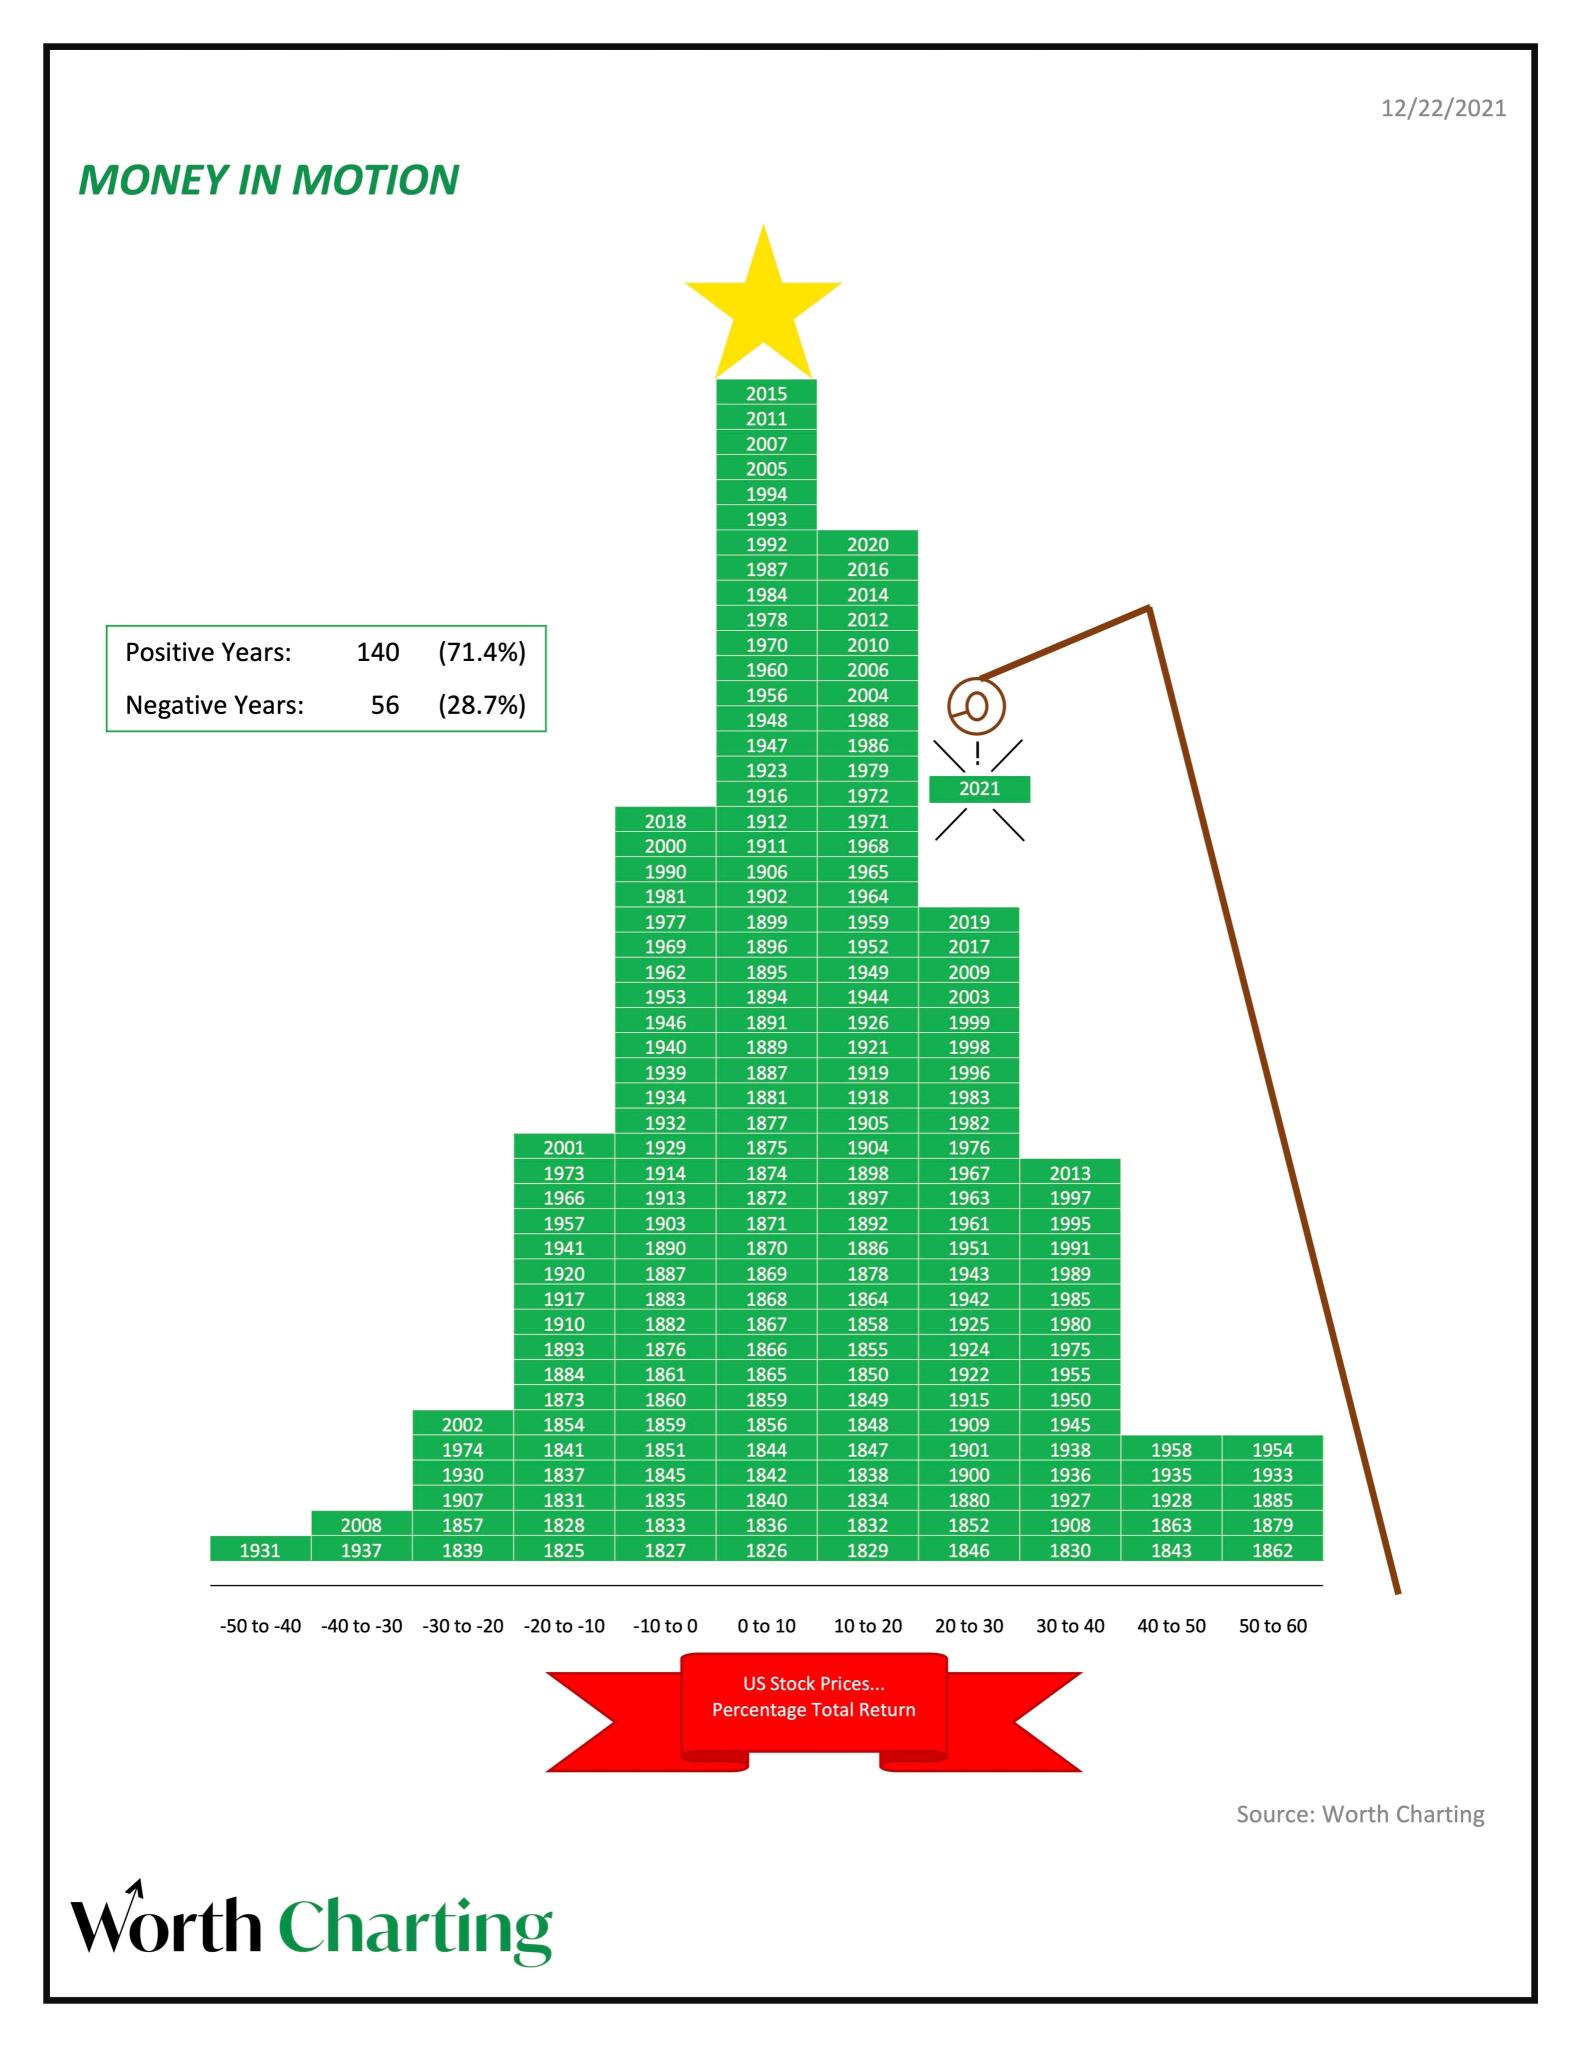 The "Christmas Tree" stacking chart of historical annual returns for the S&P 500